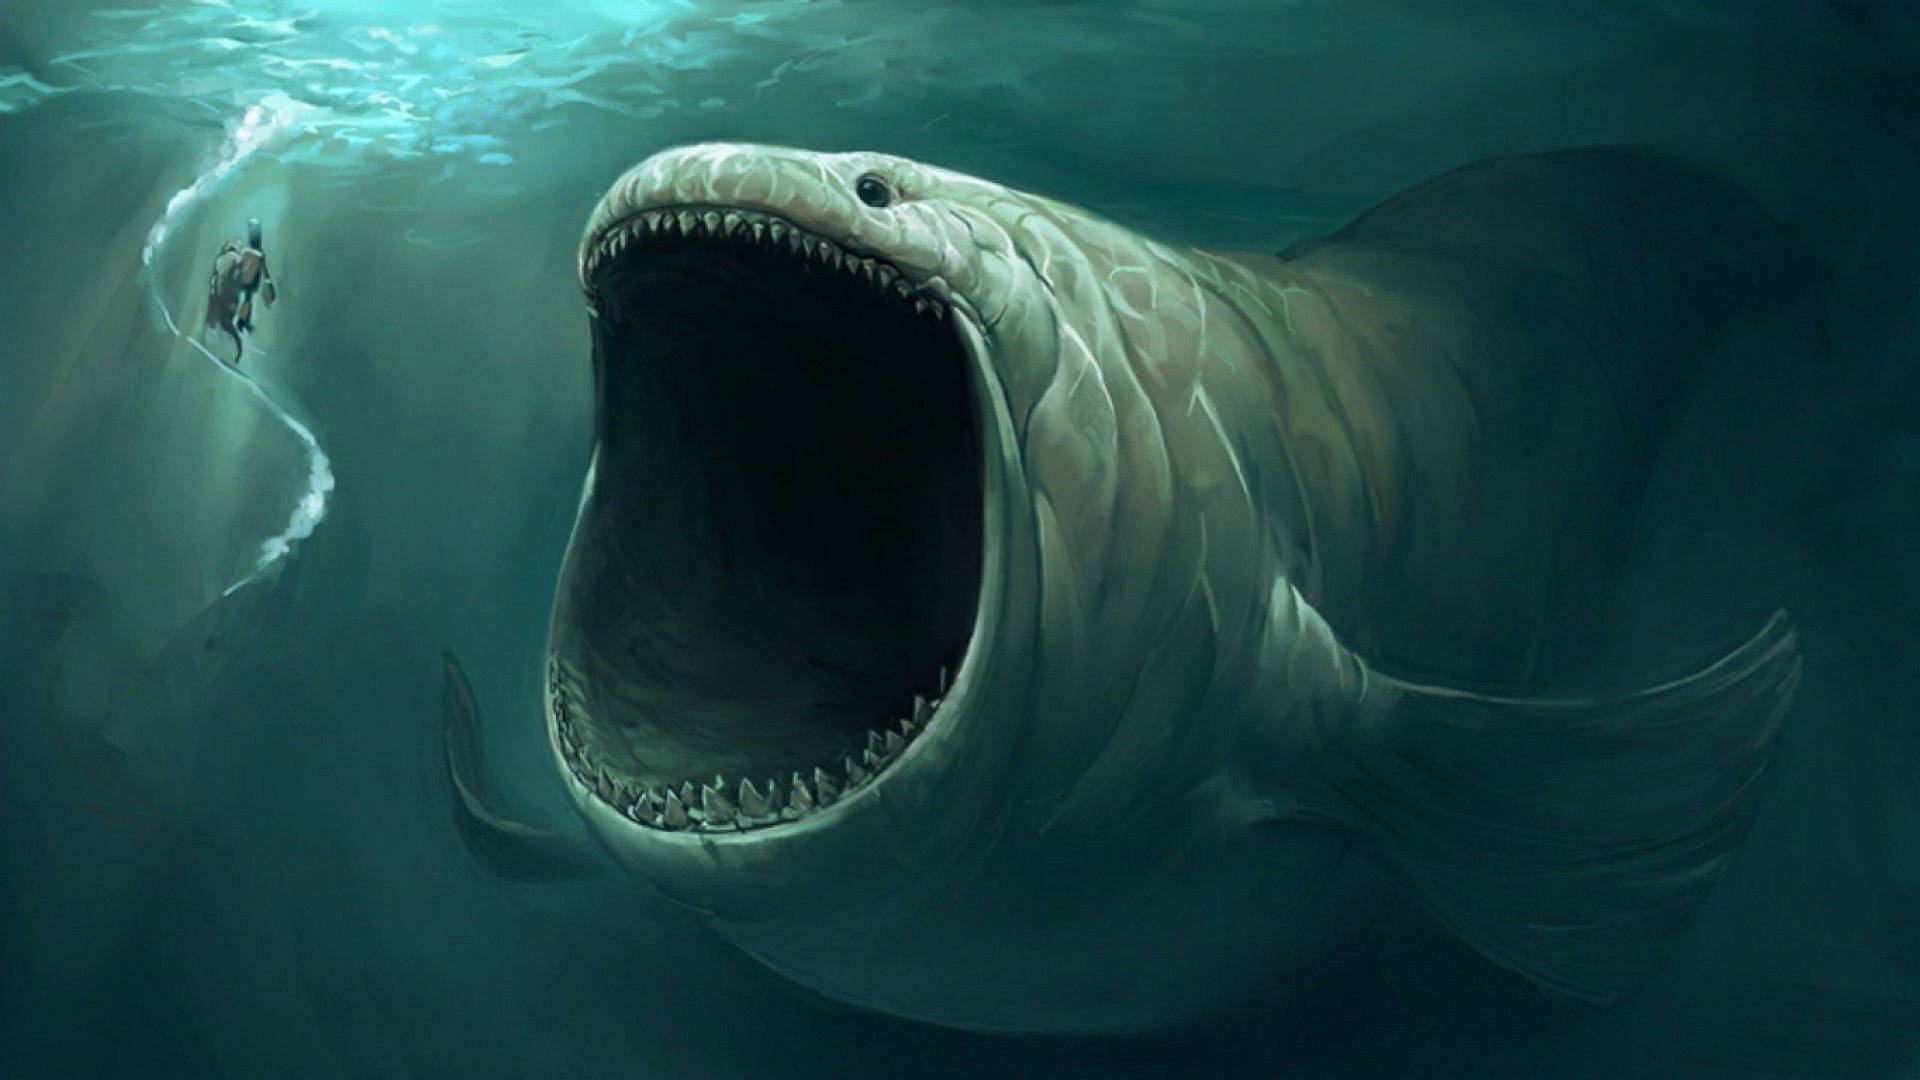 Scary Giant Underwater Creature Background